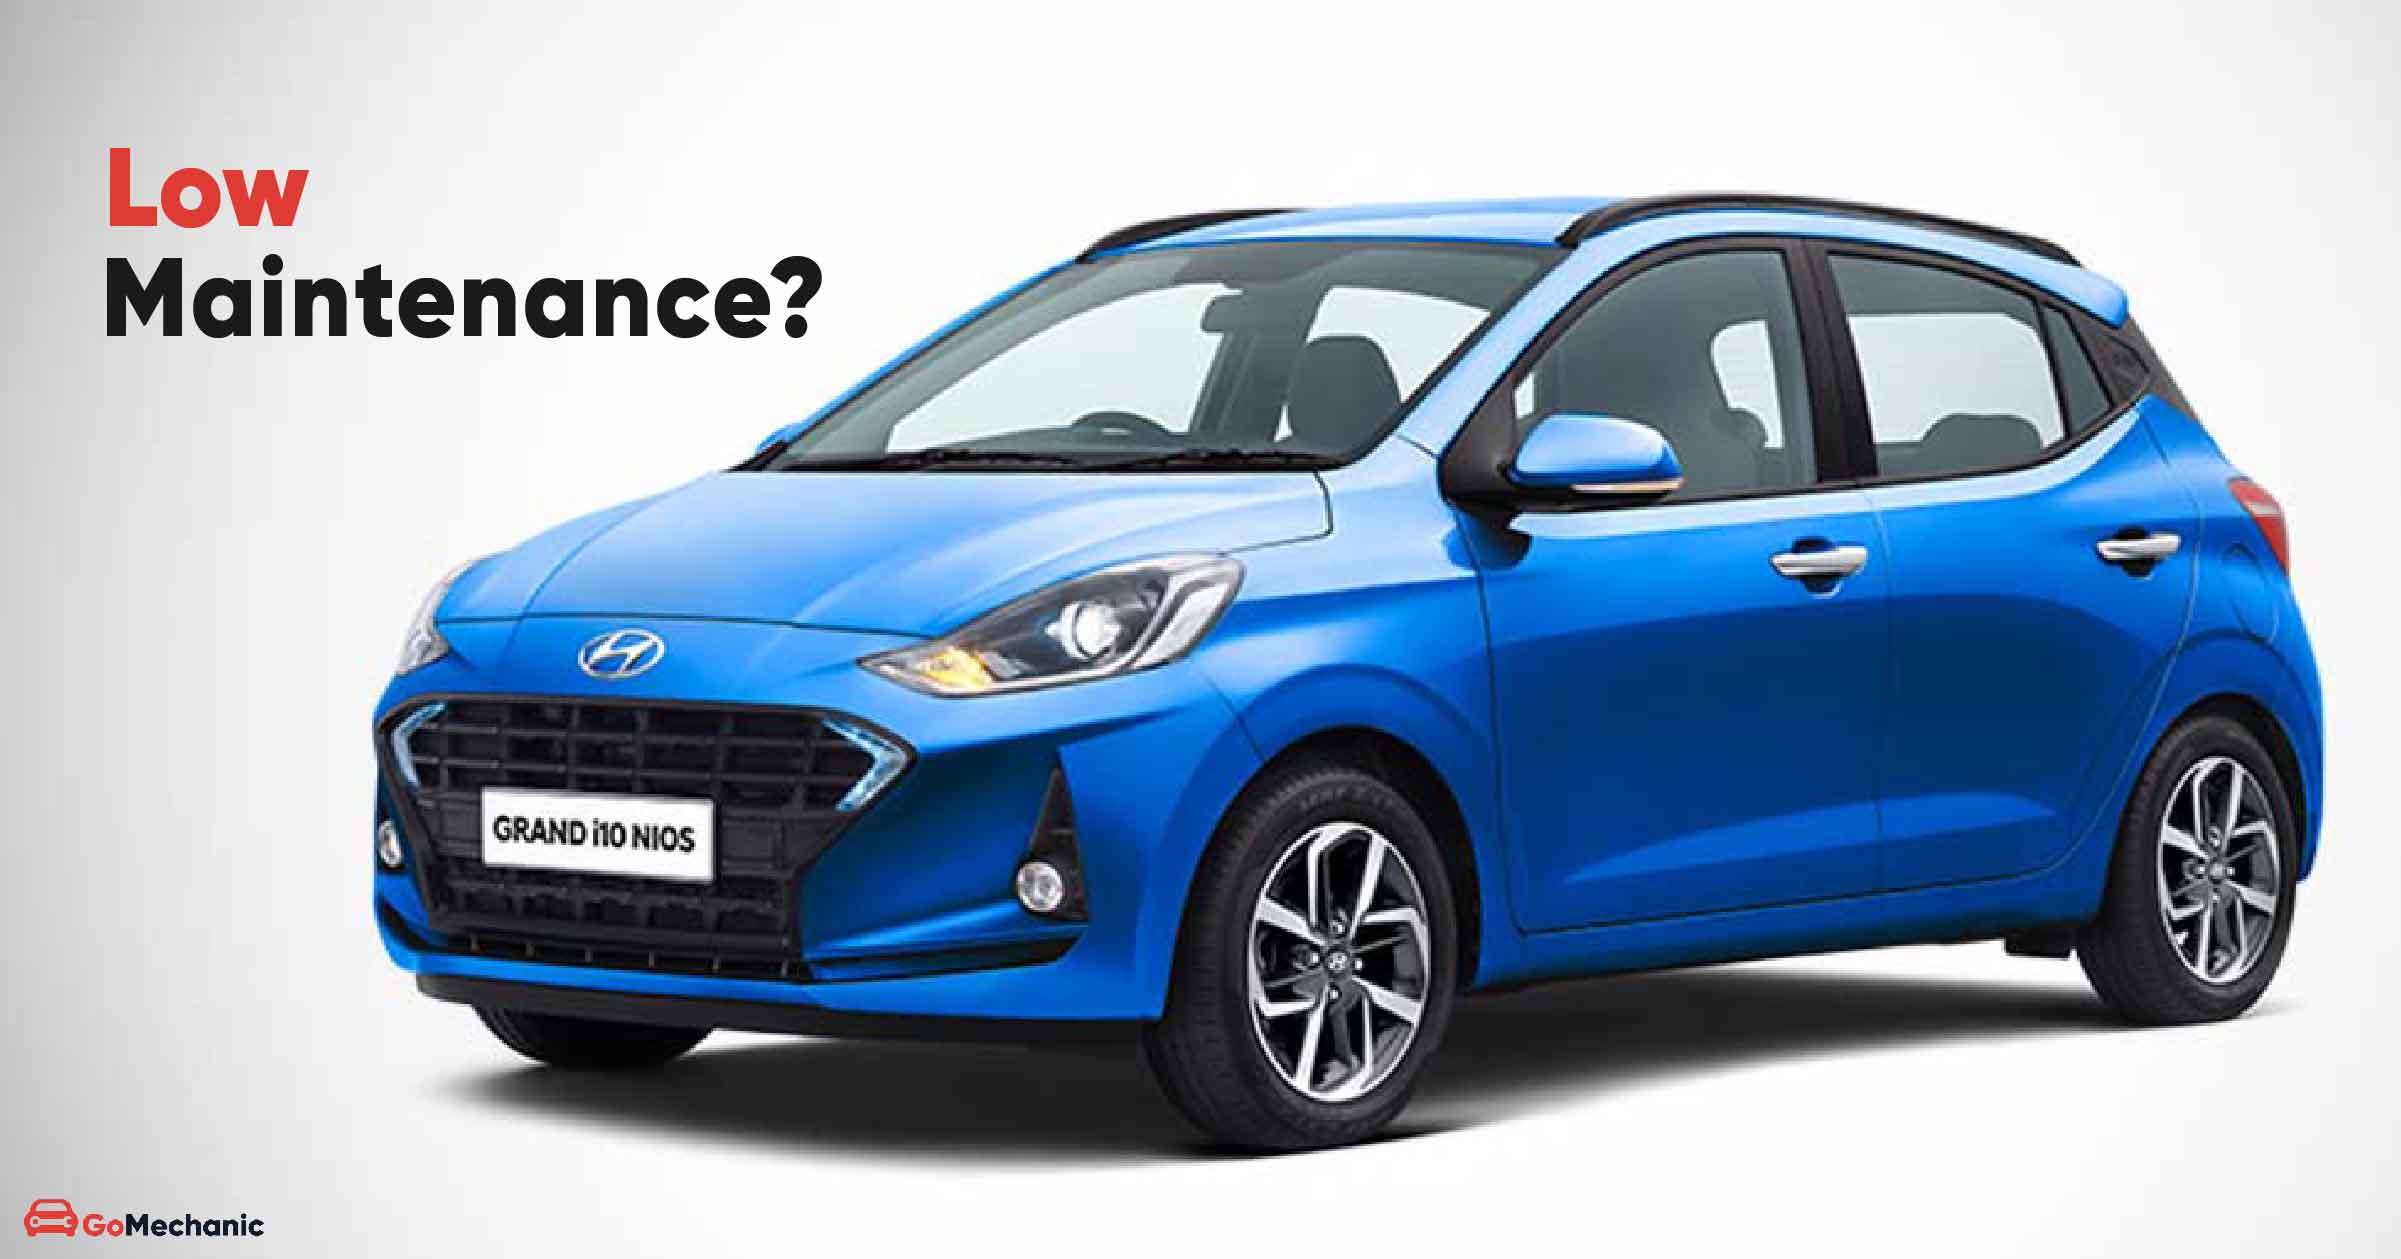 10 Low Maintenance Cars in India